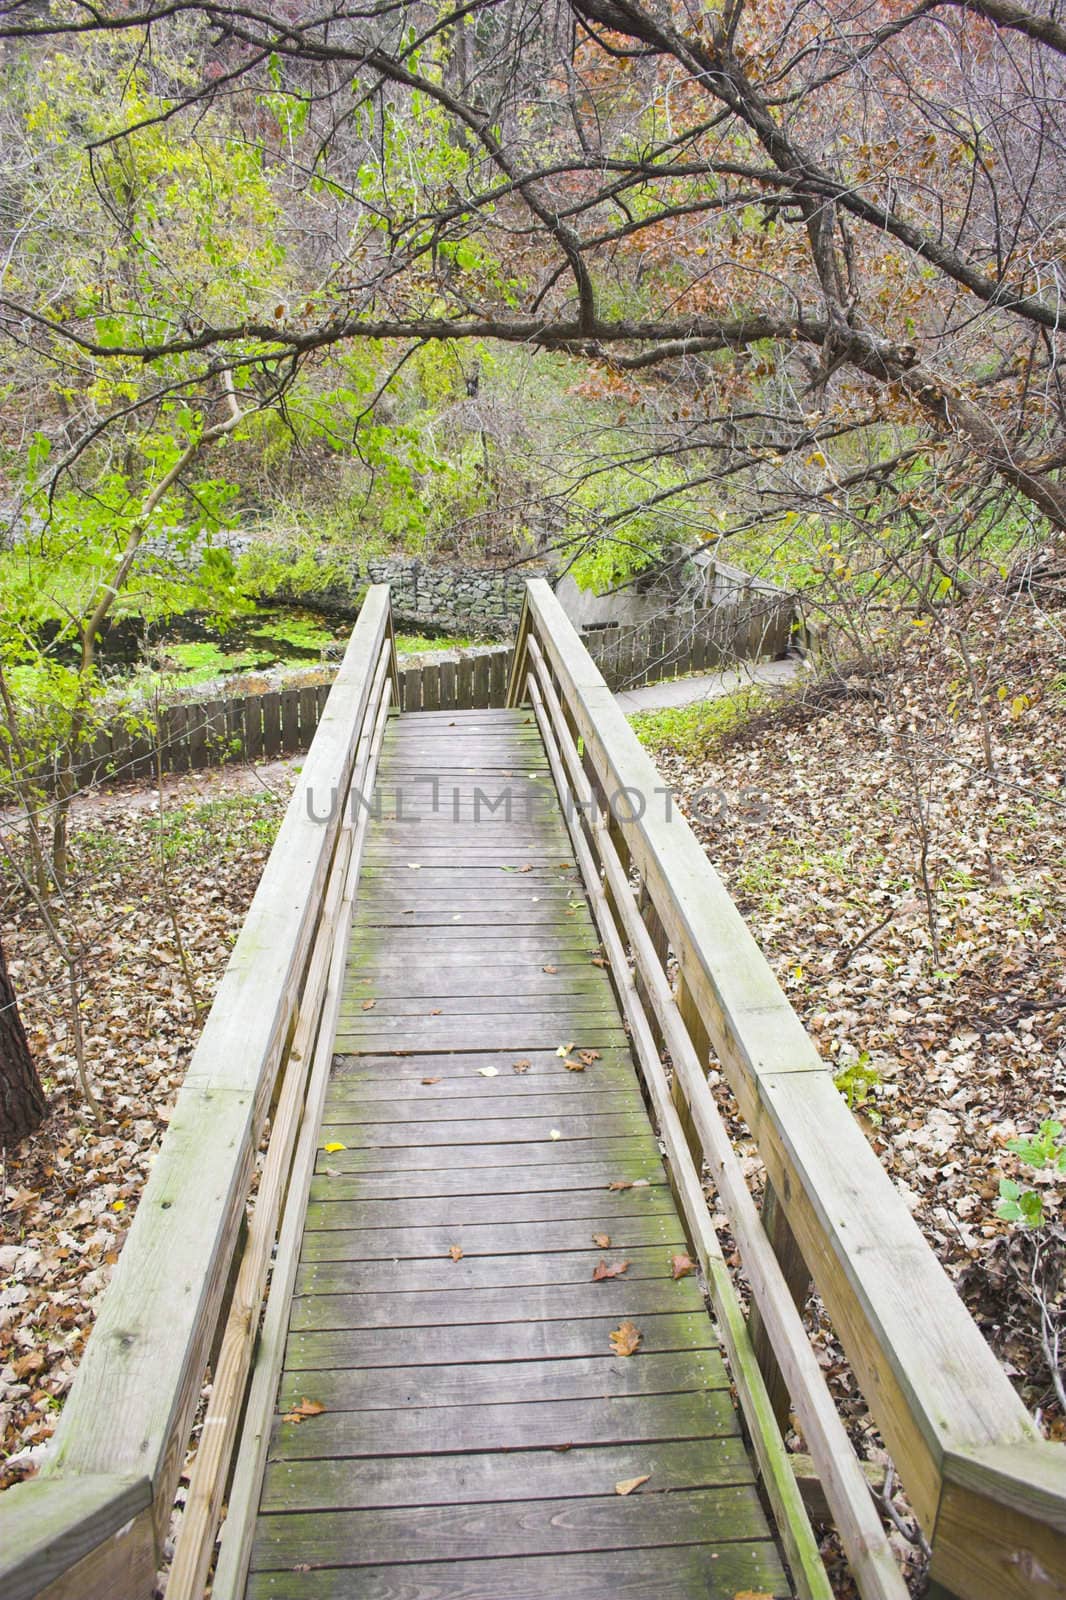 View of the trail with wooden walkways 